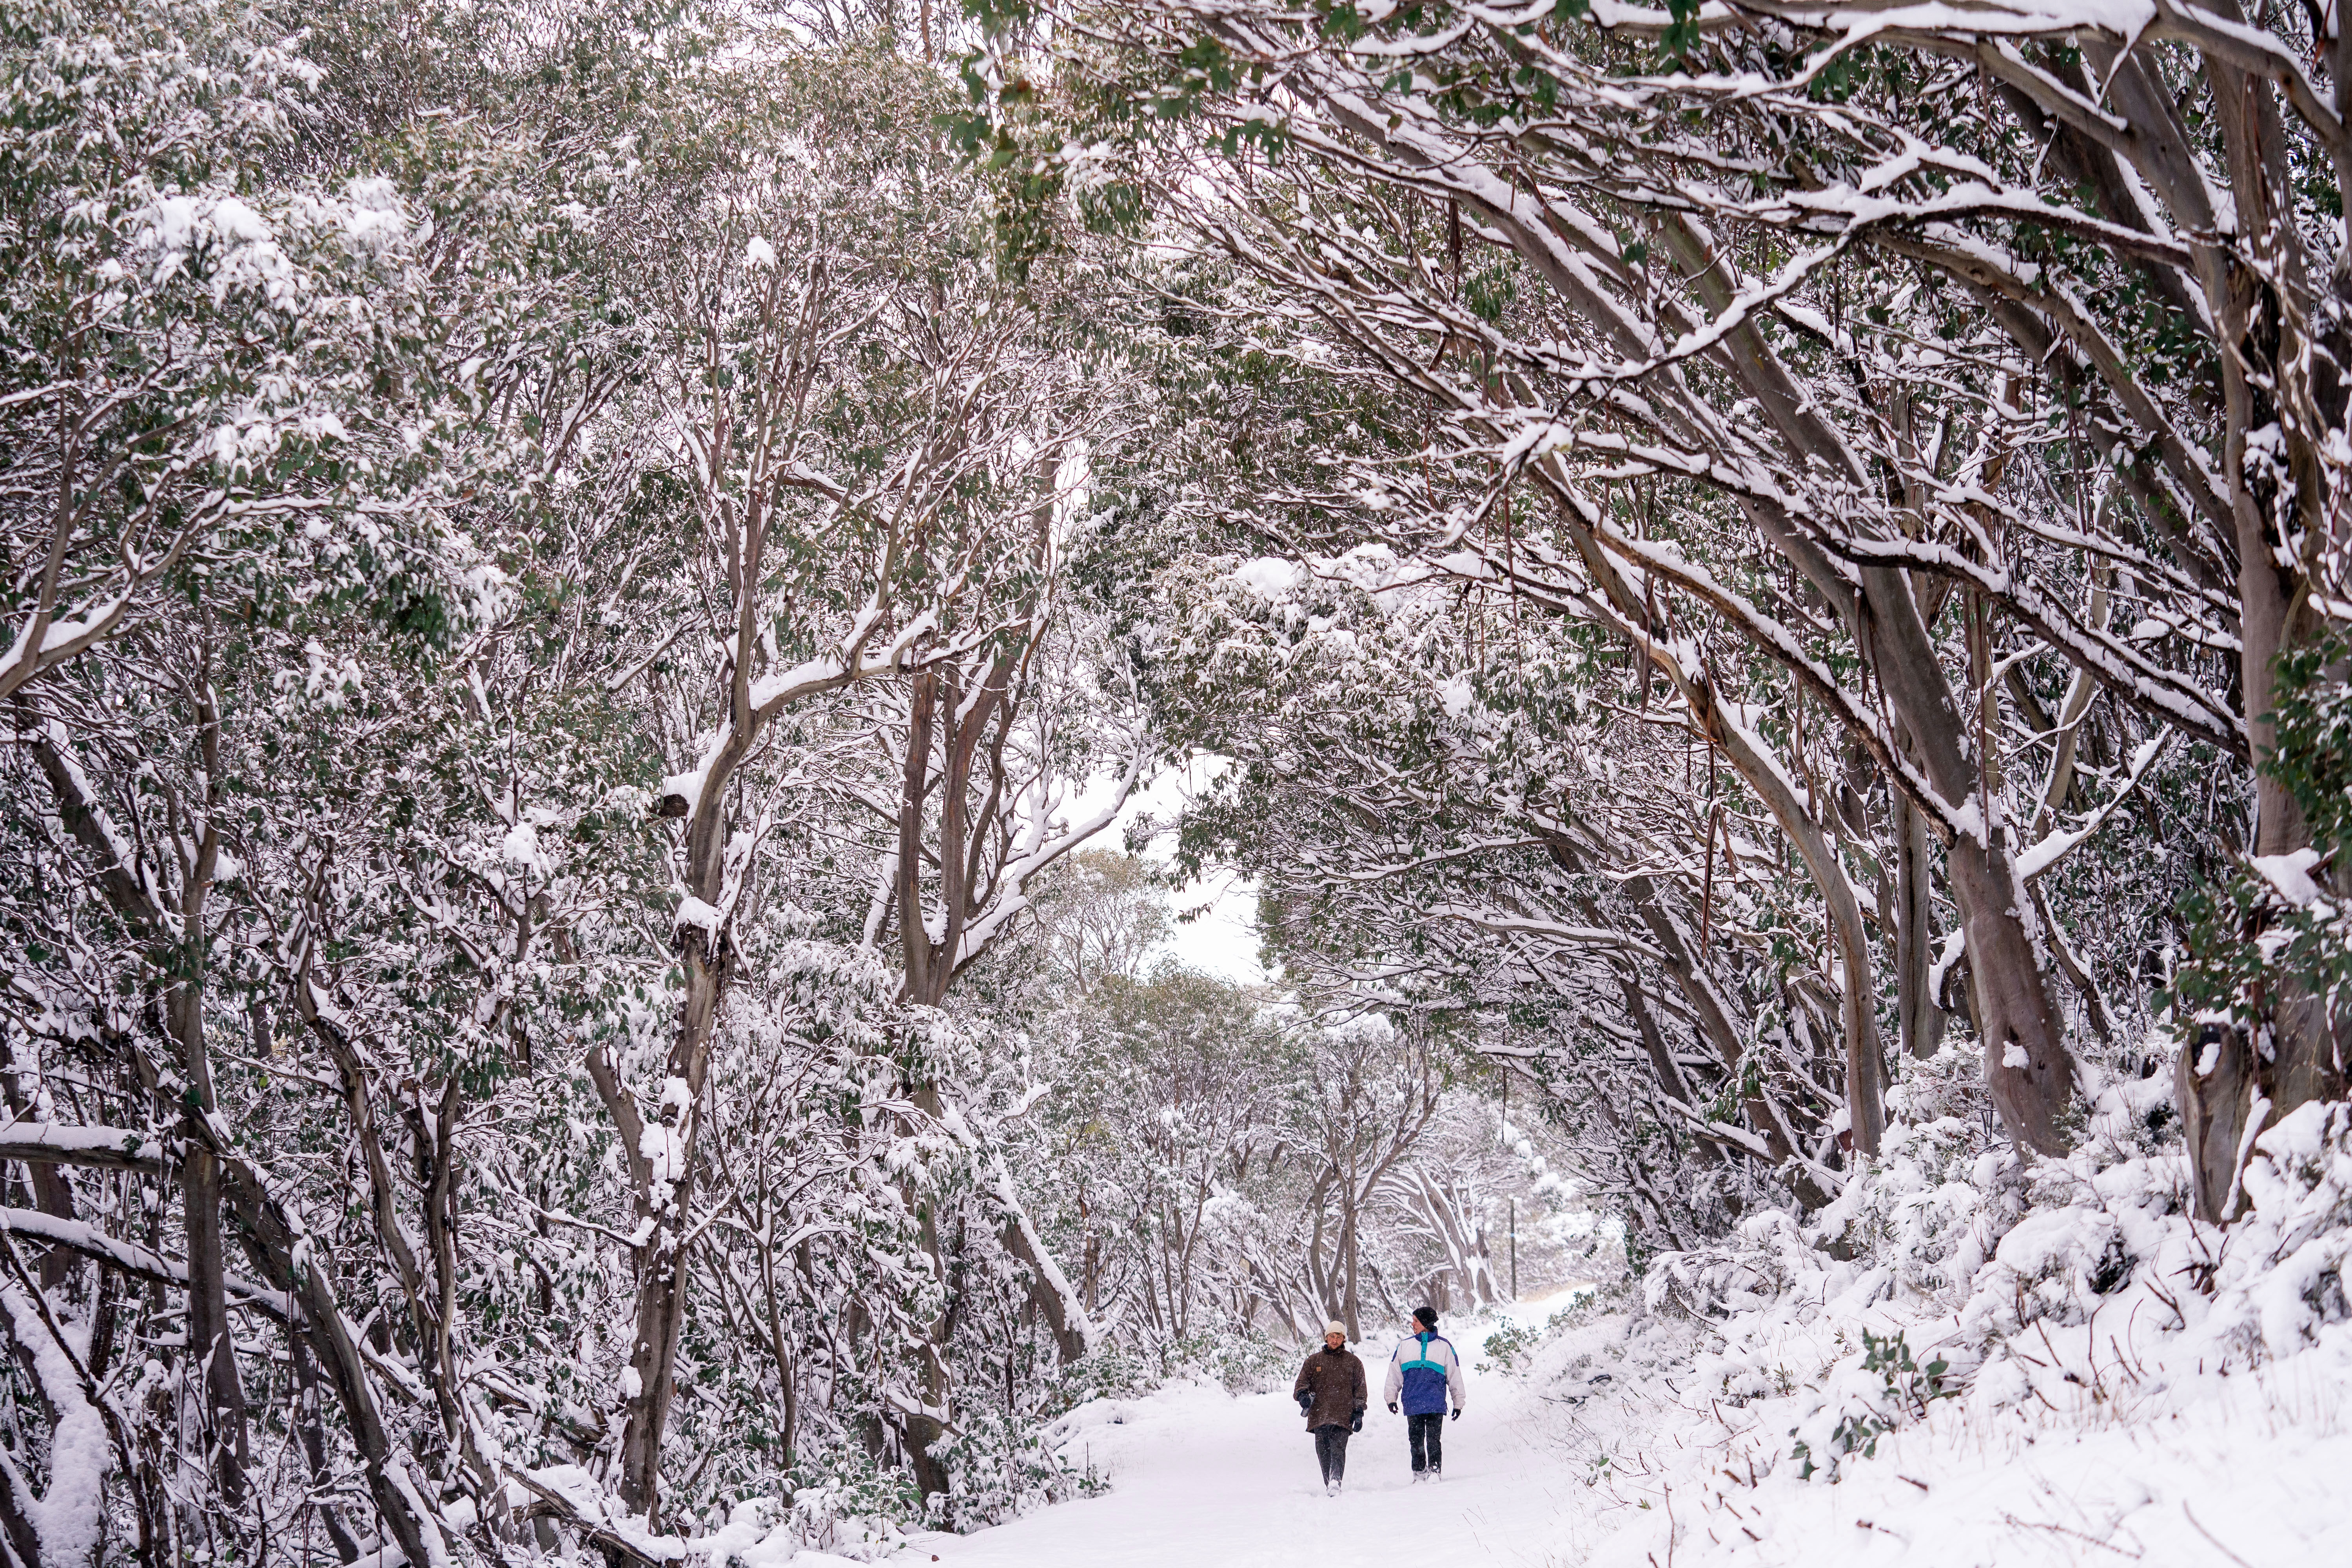 Around 15cm of snow was recorded at the Falls Creek resort on Sunday.